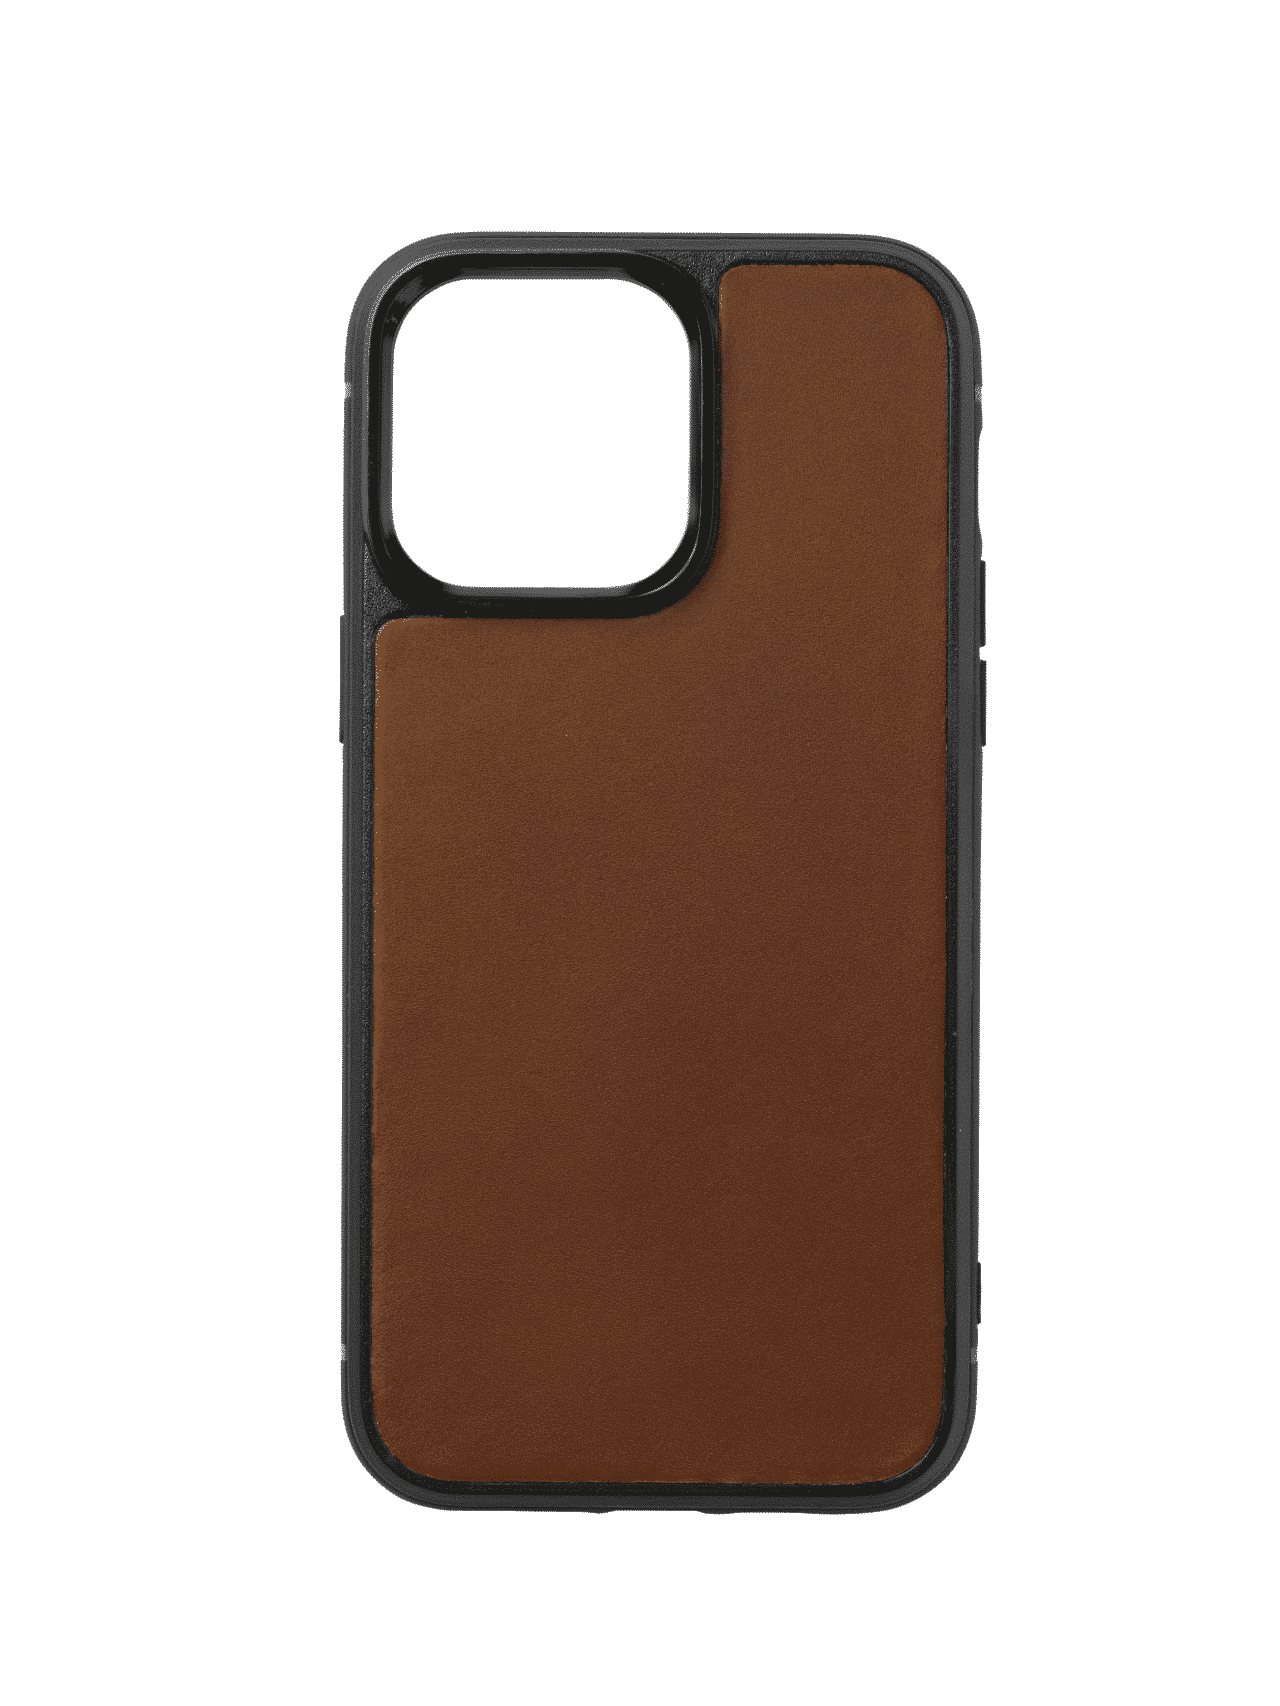 iphone case 14 leather calf brown